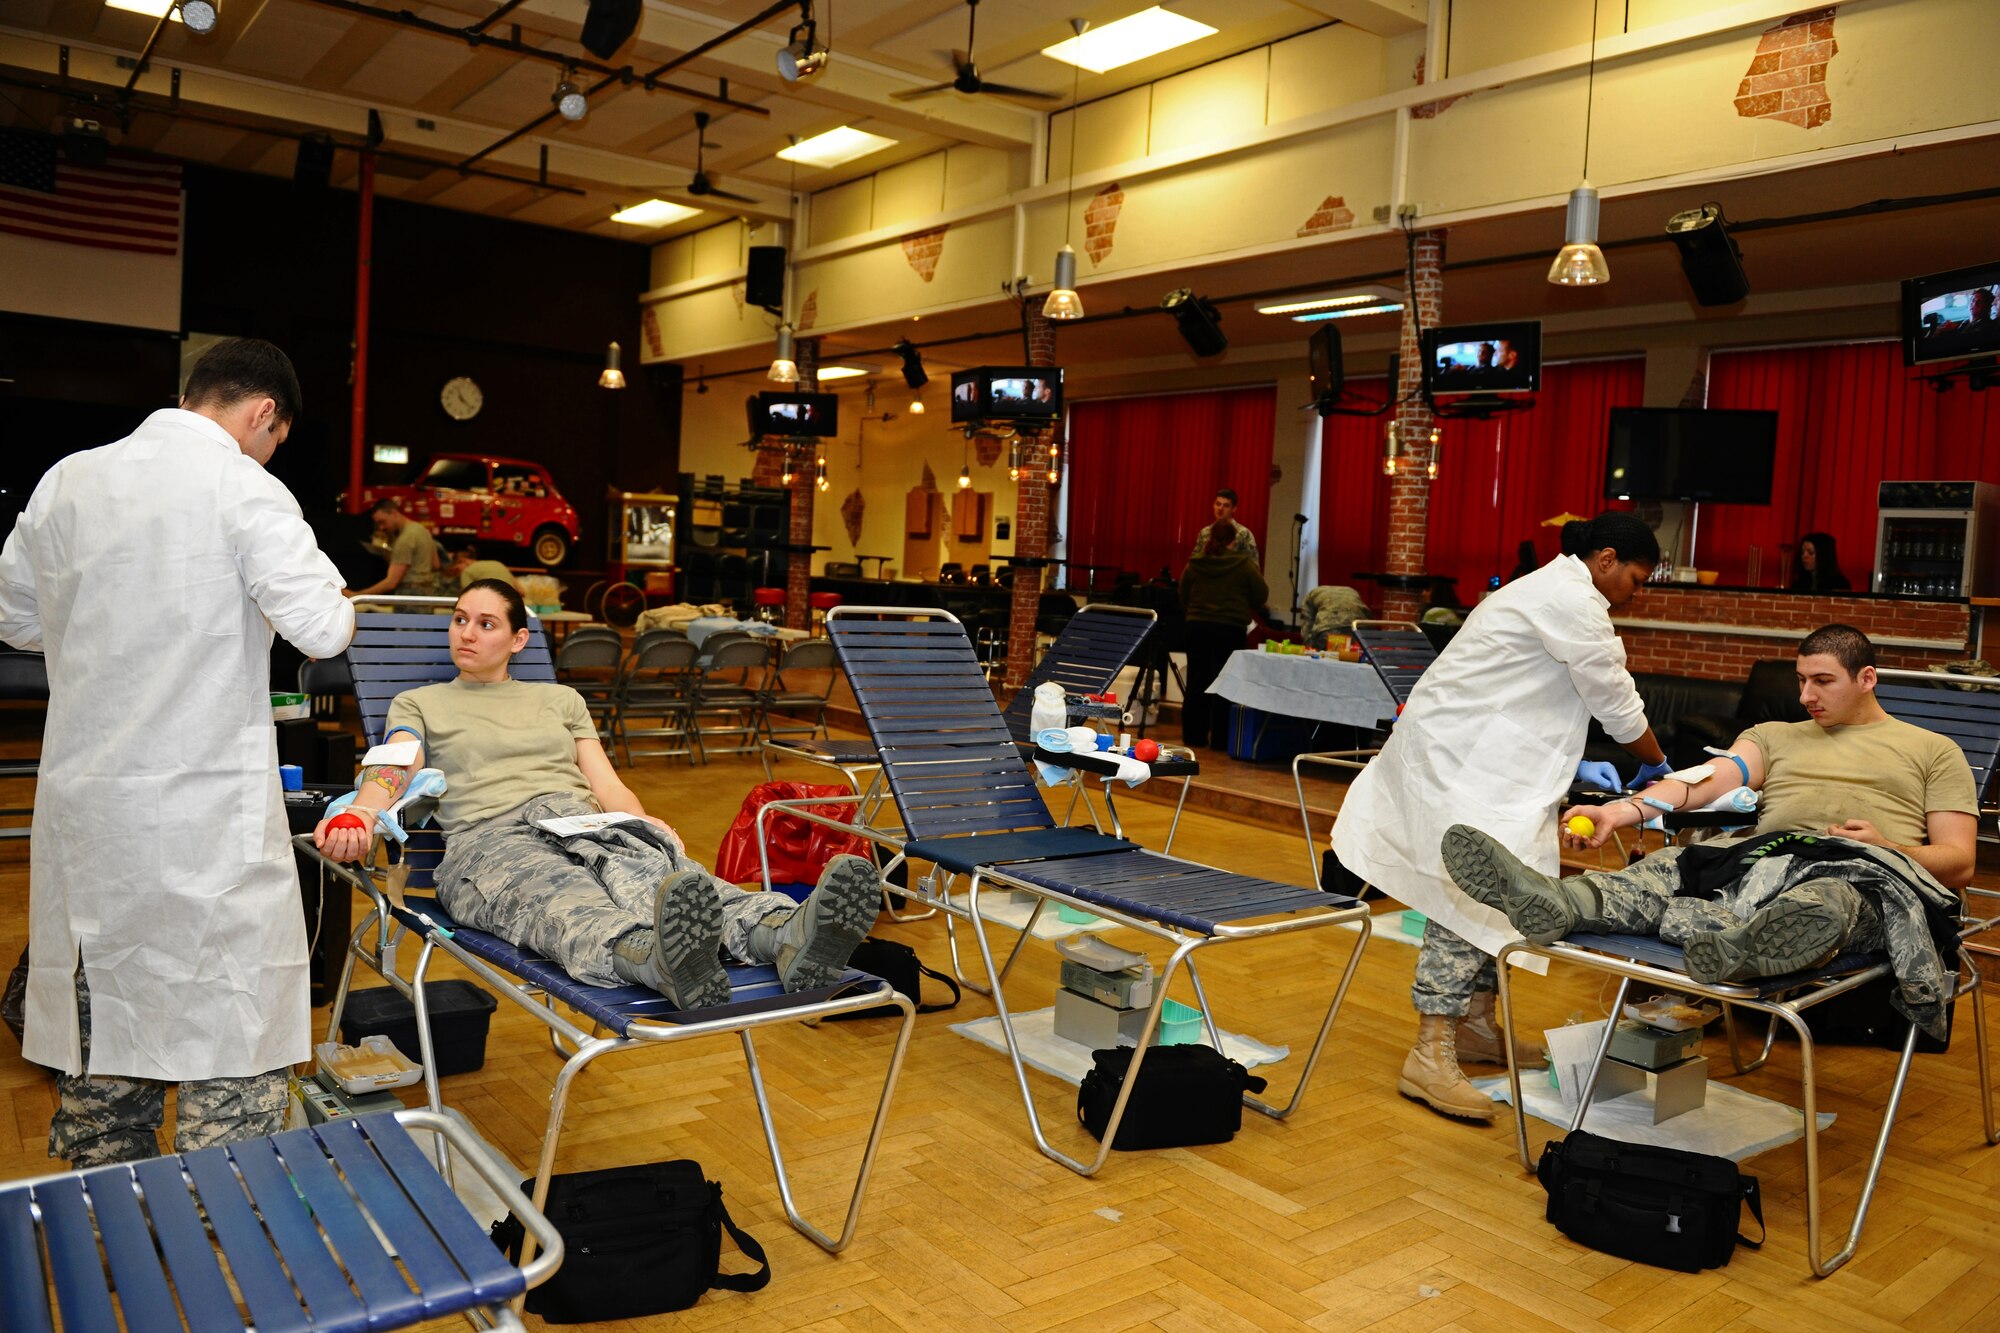 SPANGDAHLEM AIR BASE, Germany – Landstuhl Regional Medical Center medical lab technicians receive blood from donors during the Spangdahlem Community Blood Drive at the Brick House here March 21. Spangdahlem members donated blood to the Armed Services Blood Program, which distributes blood products to service members and their families around the world. (U.S. Air Force photo by Airman 1st Class Matthew B. Fredericks/Released)